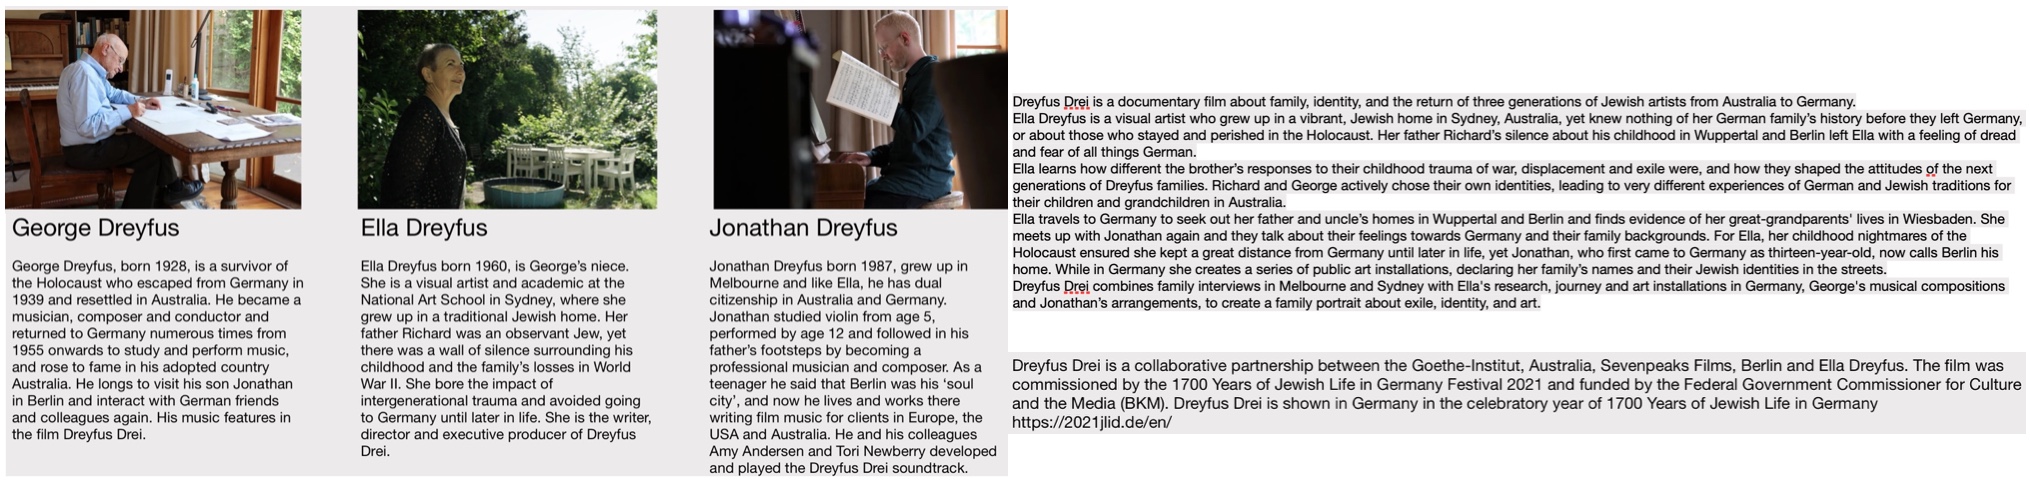 A Musical Life, in Melbourne and Berlin:  Composers father and son George and Jonathan Dreyfus alongside Ella Dreyfus … the protagonists in the documentary film Dreyfus Drei: their lives, their history, their art, their music …